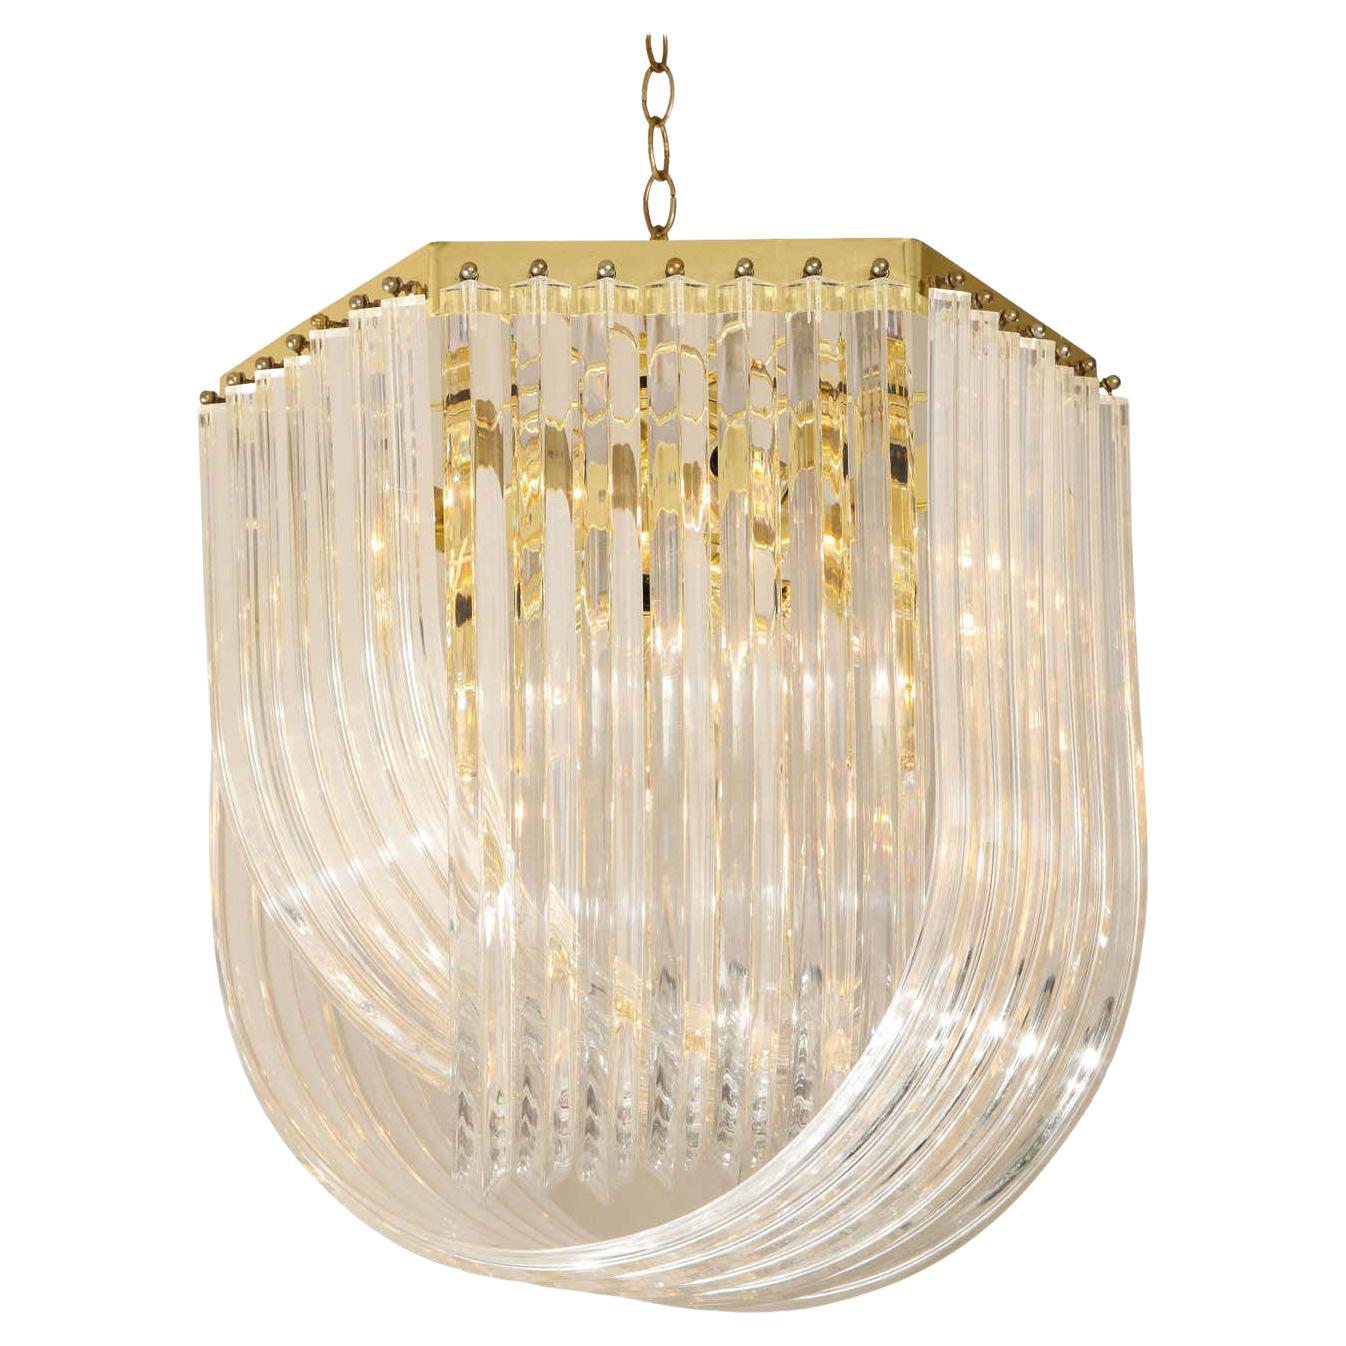 Midcentury Curved Lucite Ribbon Chandelier in Brass For Sale